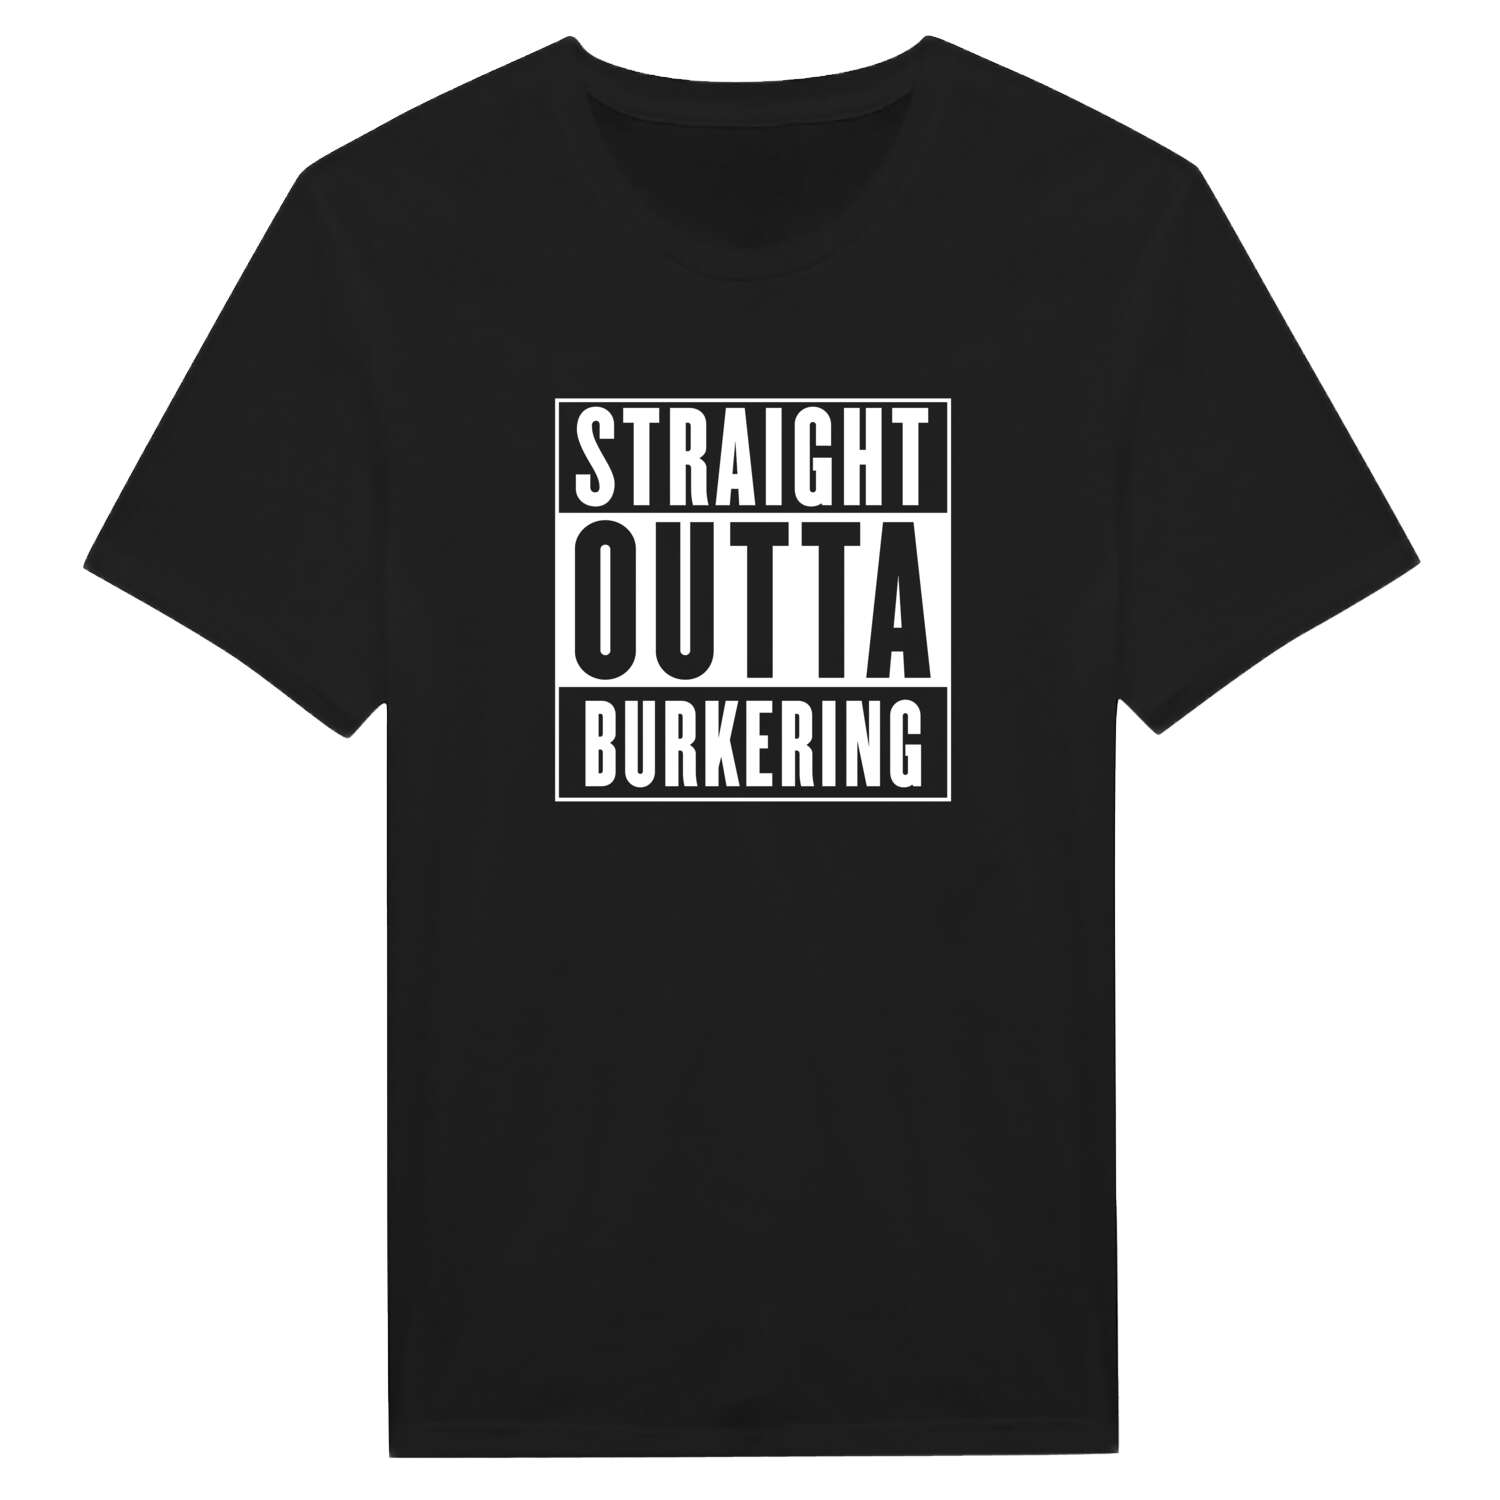 Burkering T-Shirt »Straight Outta«